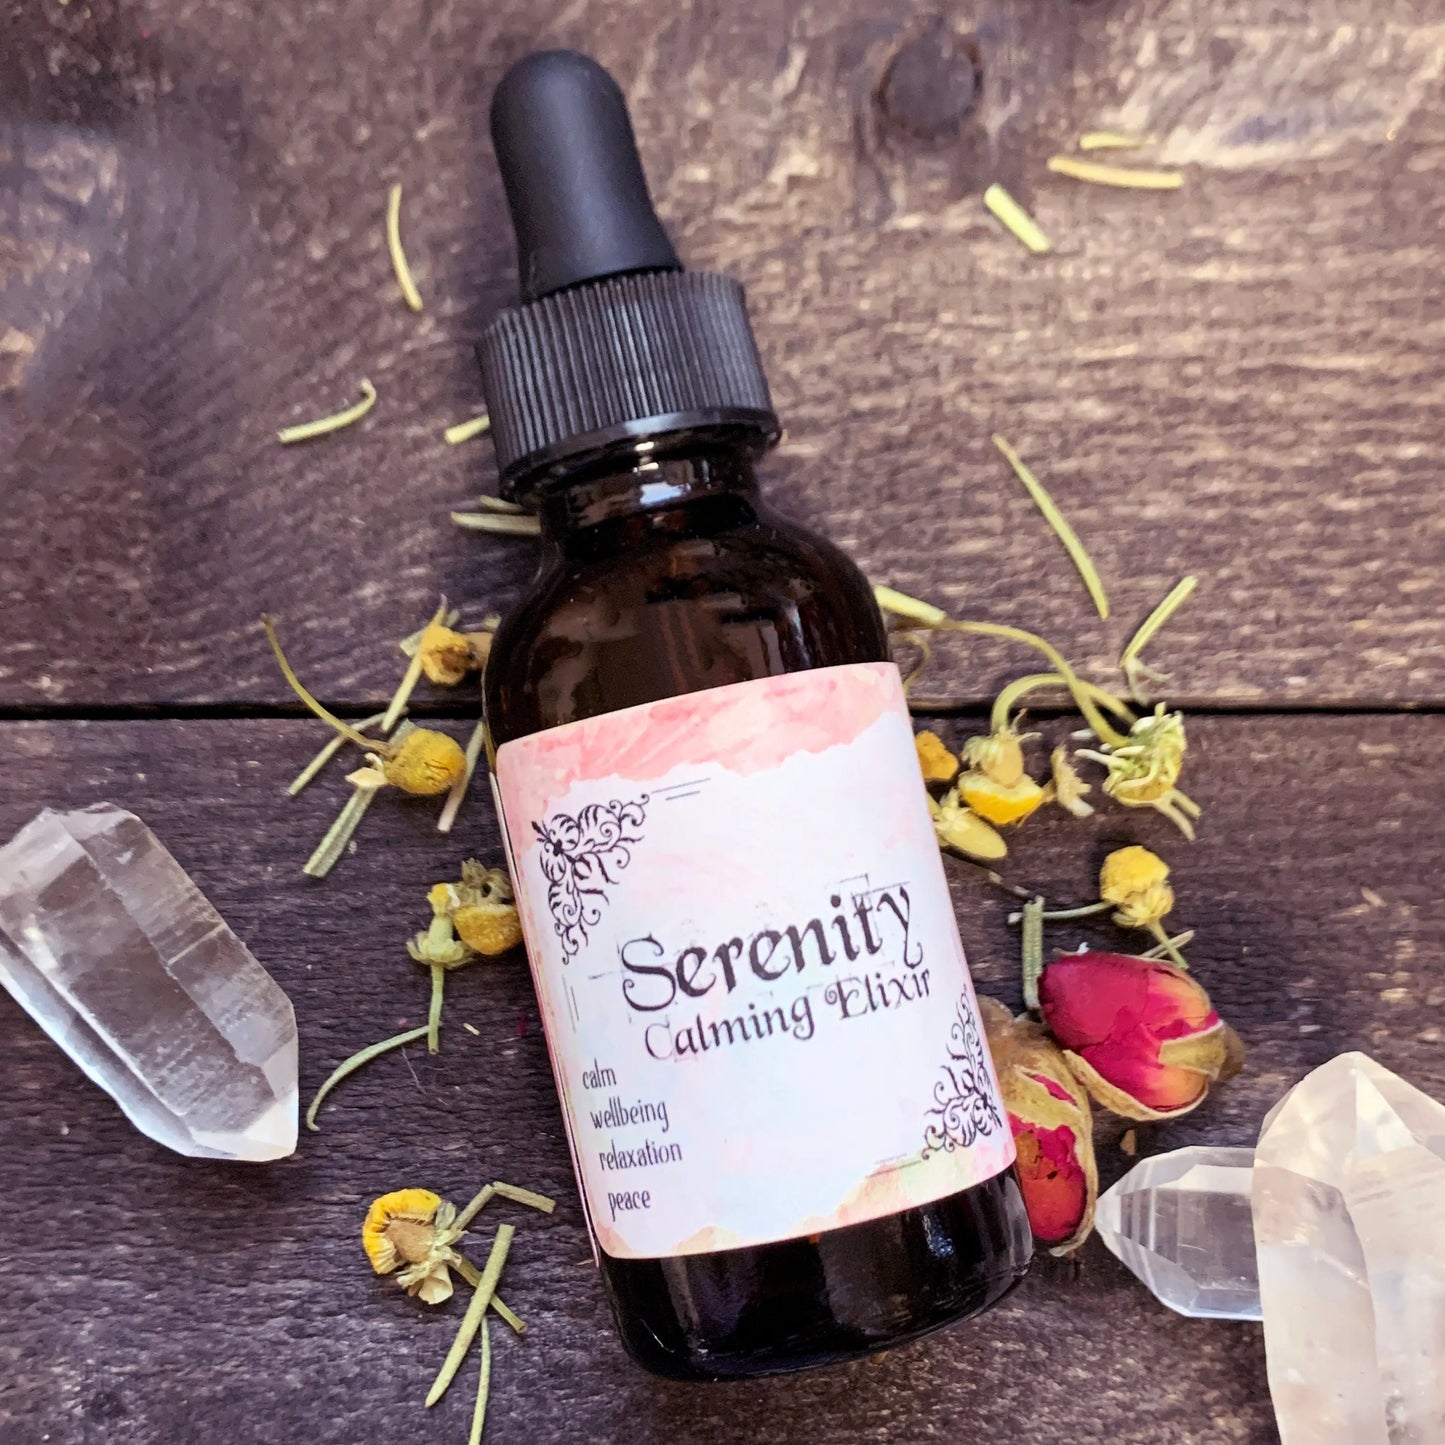 Serenity - Calming Elixir | Herbal Tincture | Energy Work | Earth Magick | Herbal Infusion | Tincture | Herb Magick | Green Witch | Peaceful - Spellbound